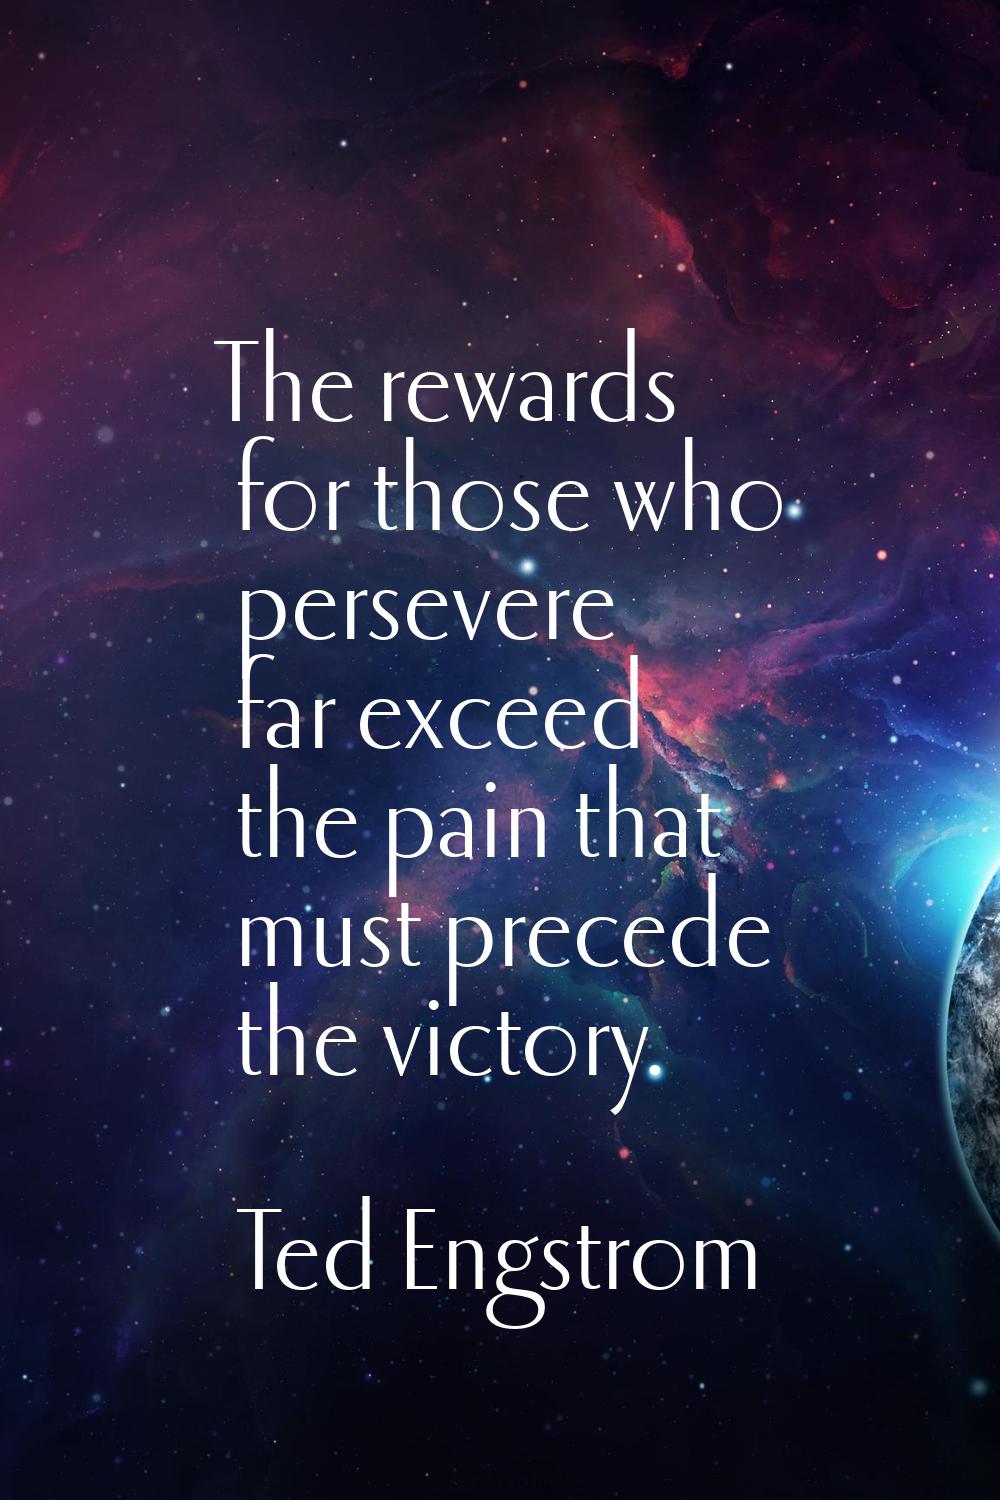 The rewards for those who persevere far exceed the pain that must precede the victory.